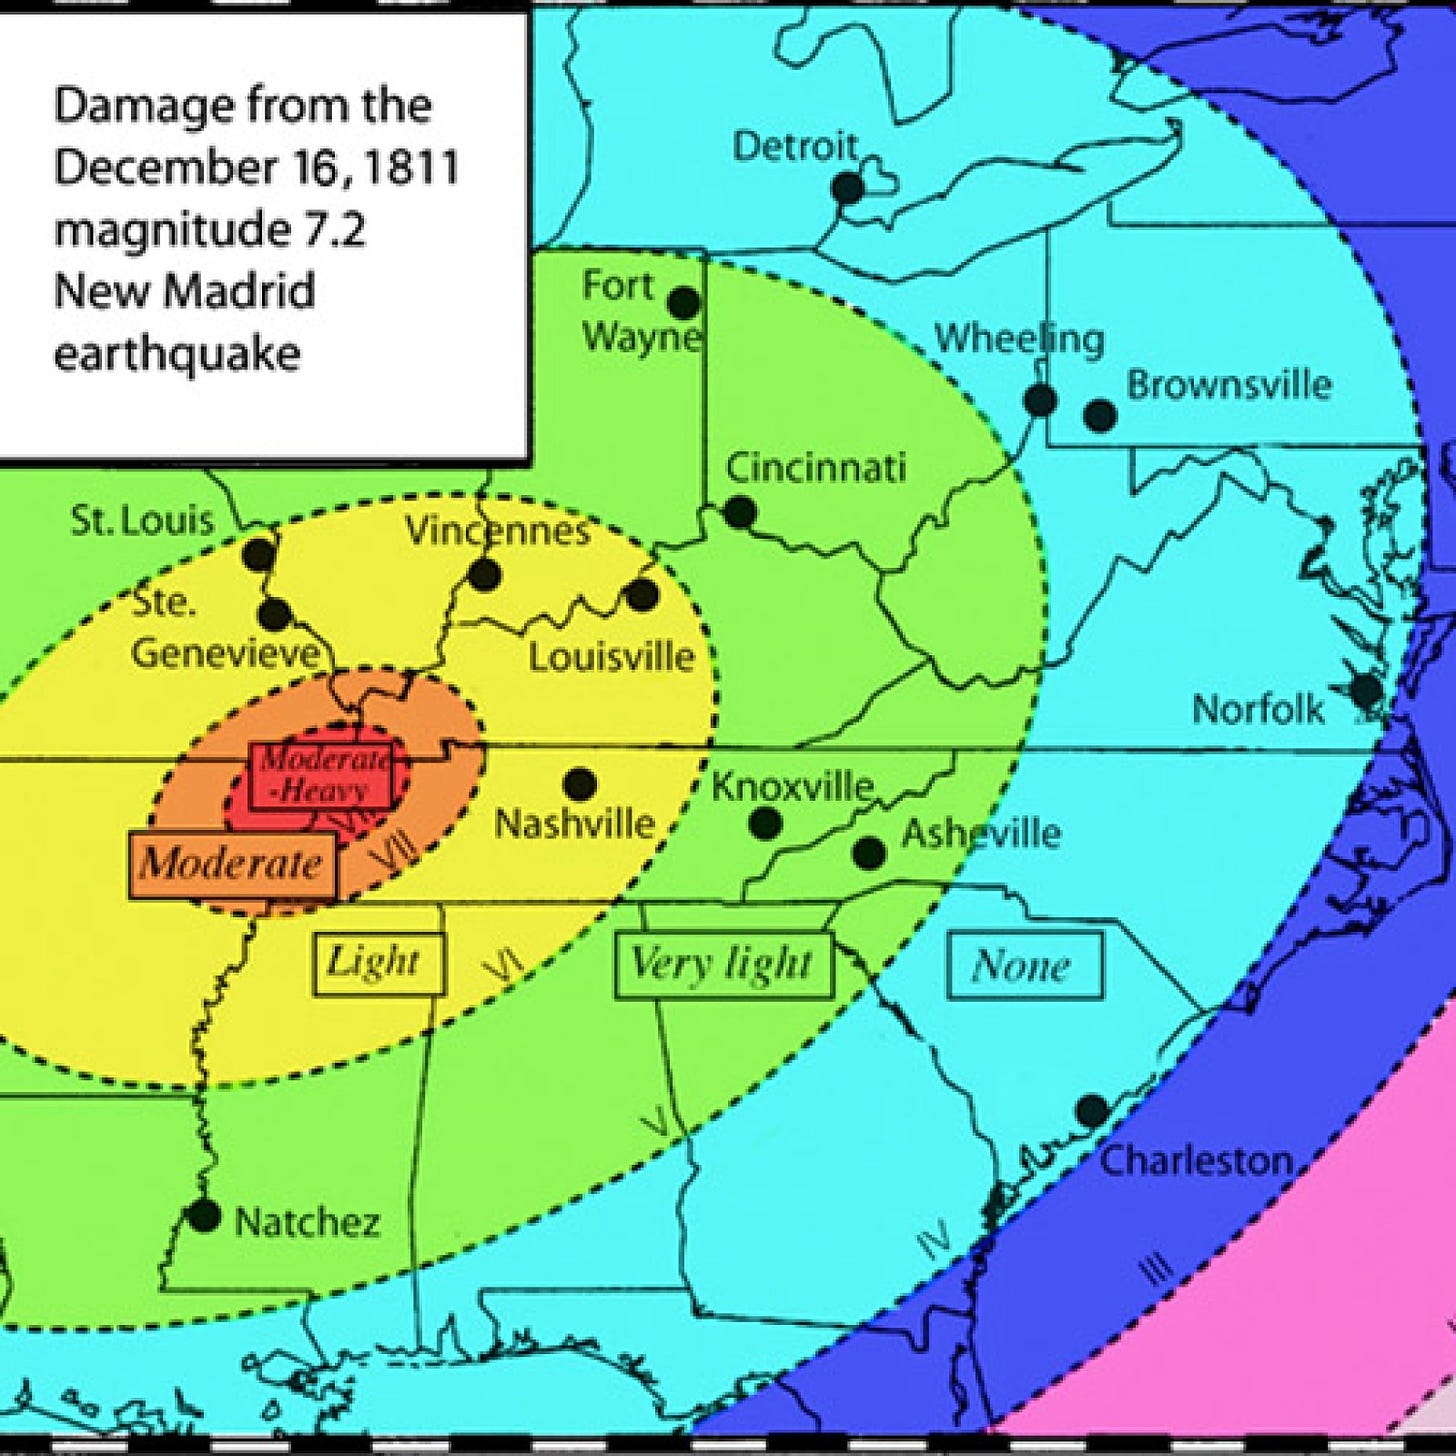 New Madrid Fault May Be Quiet for Millennia | WBEZ Chicago